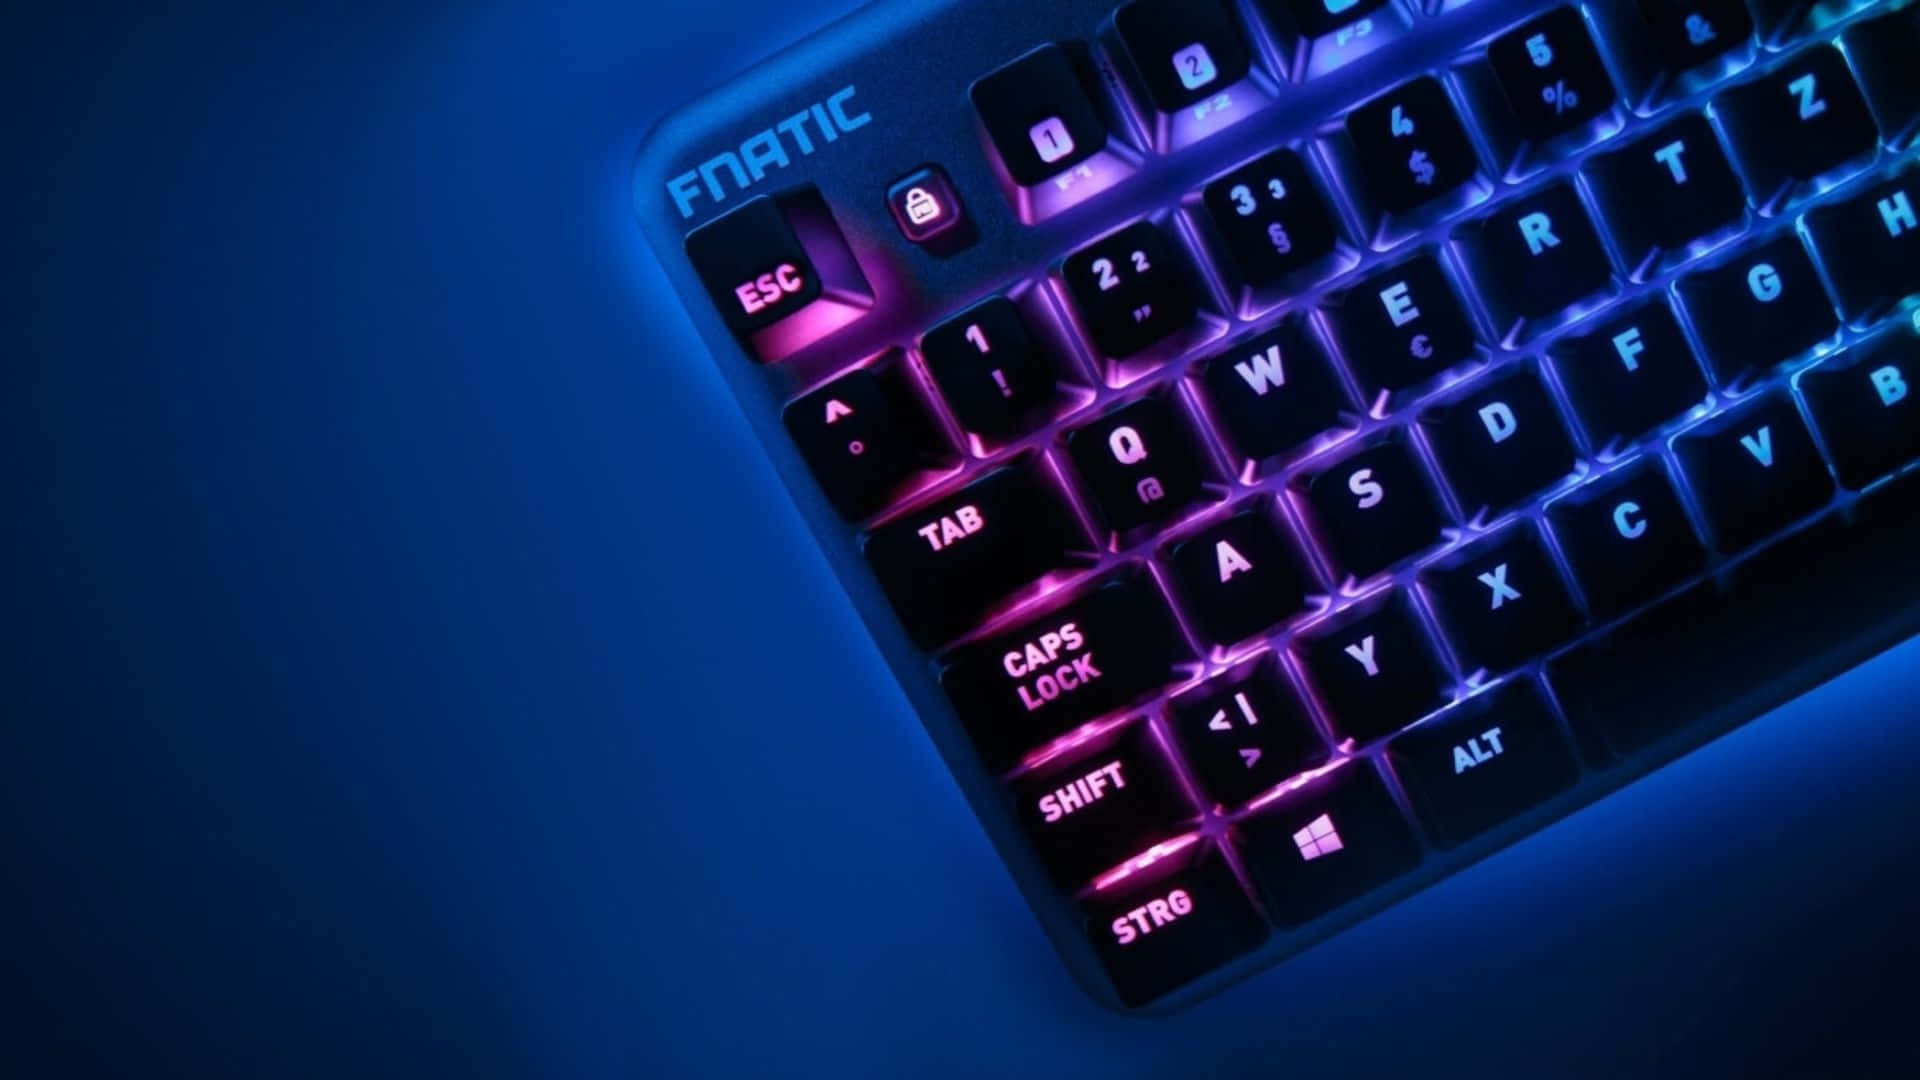 A Blue And Blue Keyboard With A Light On It